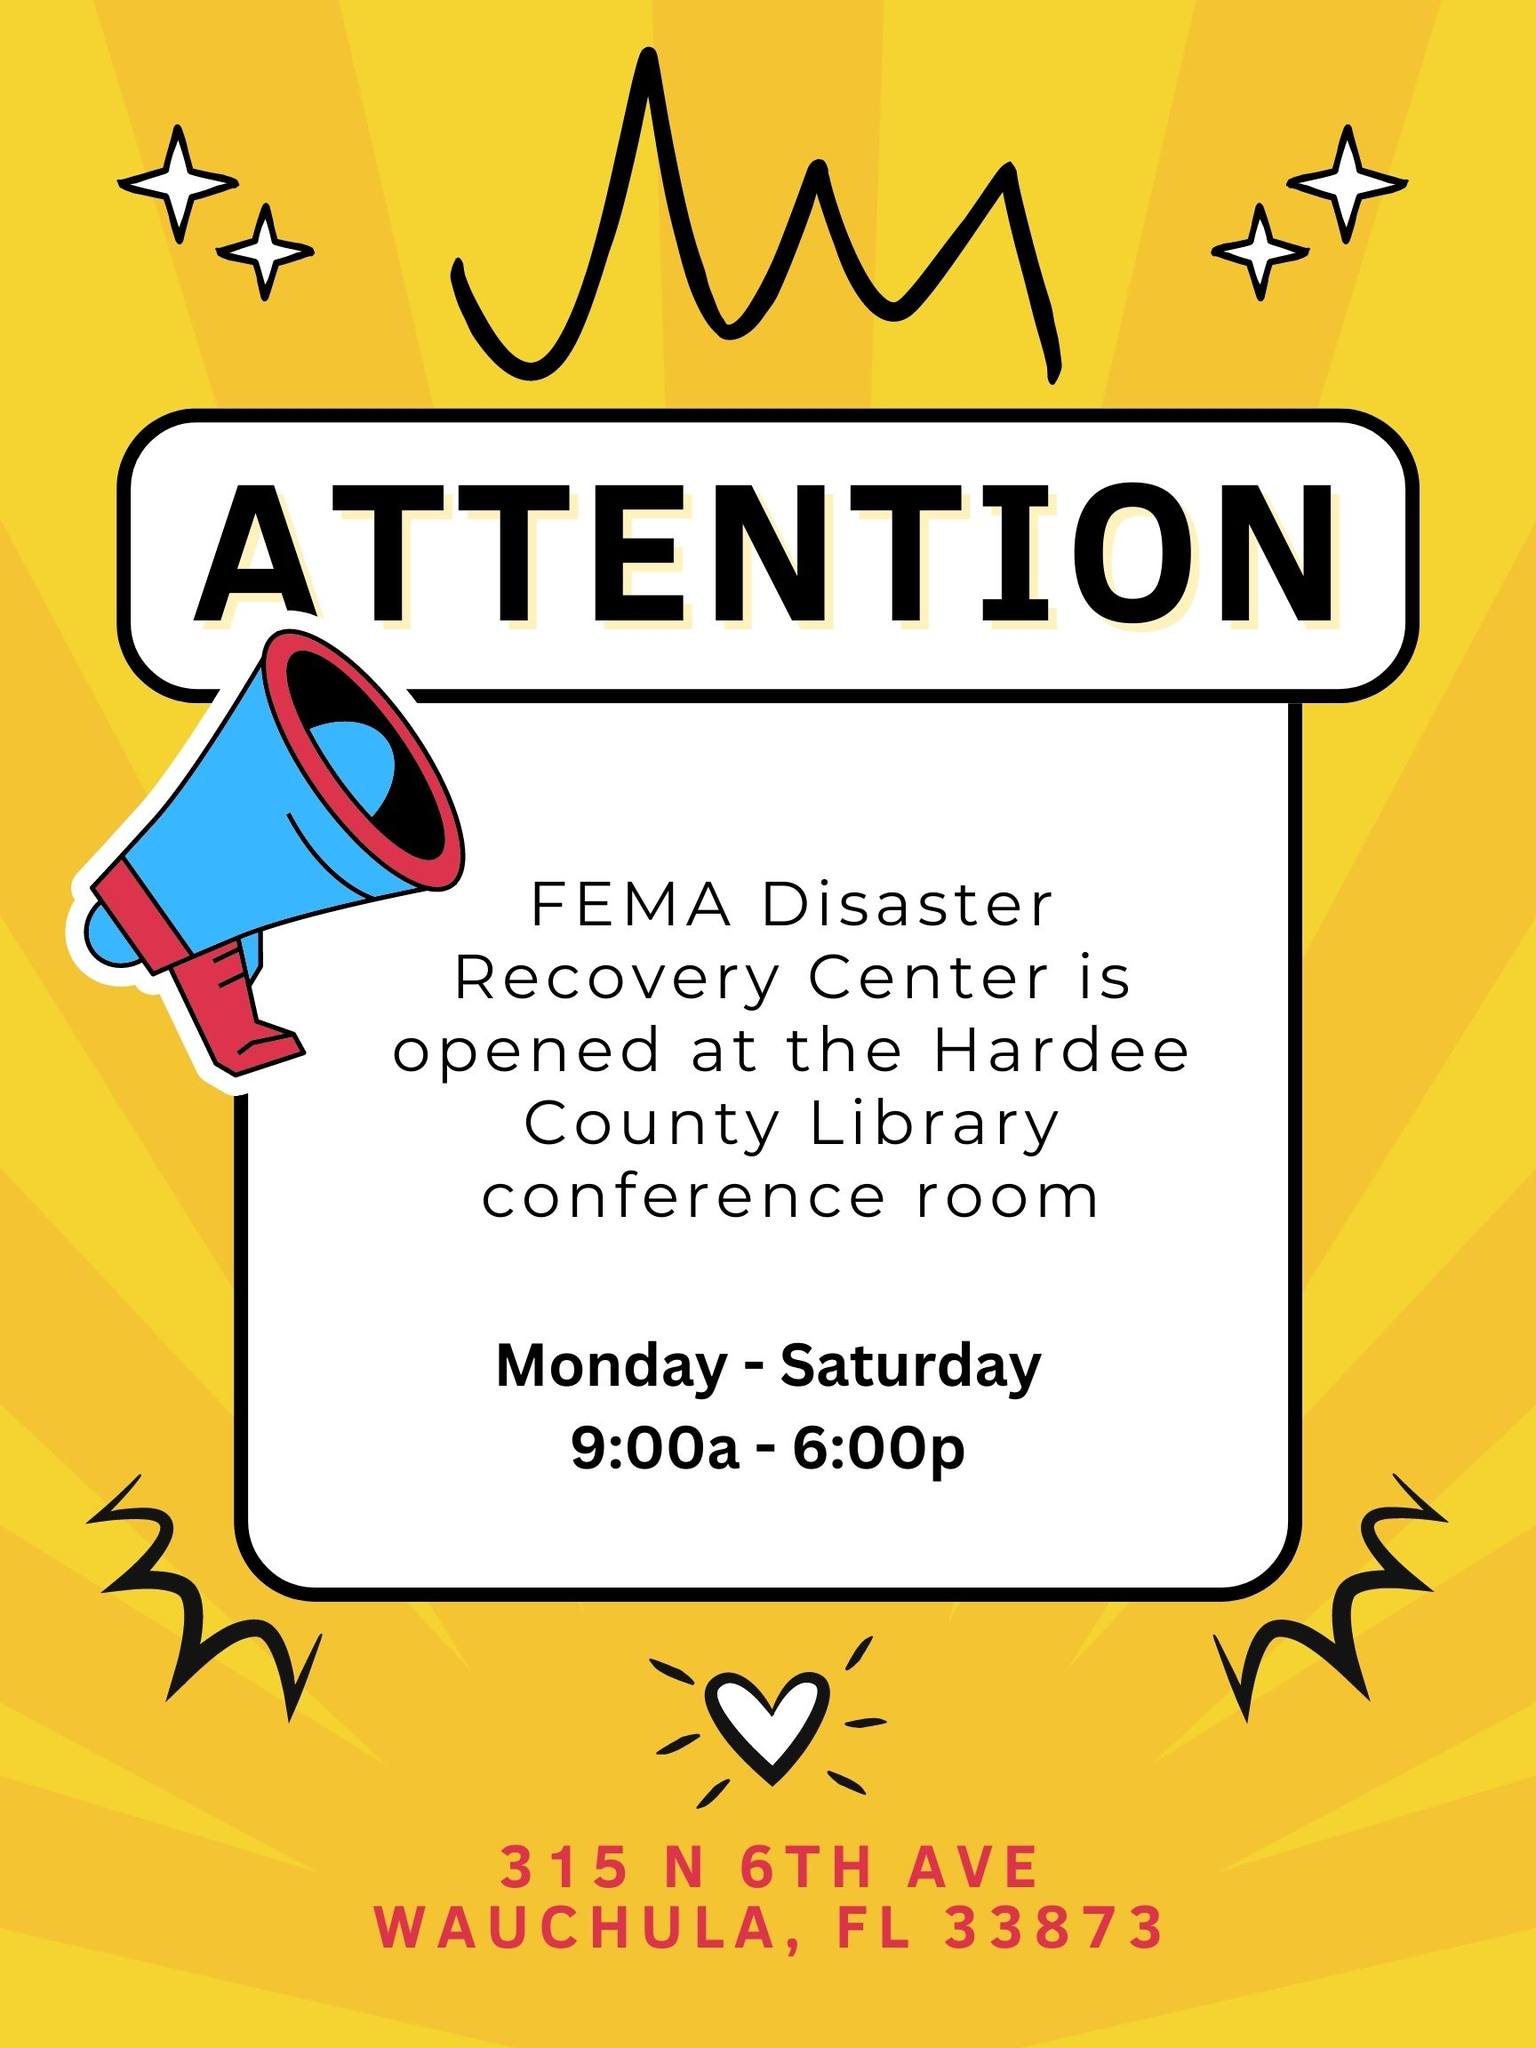 FEMA Disaster Recovery Center is opened at the Hardee County Library Monday thru Saturday 9: AM to 6:00 PM